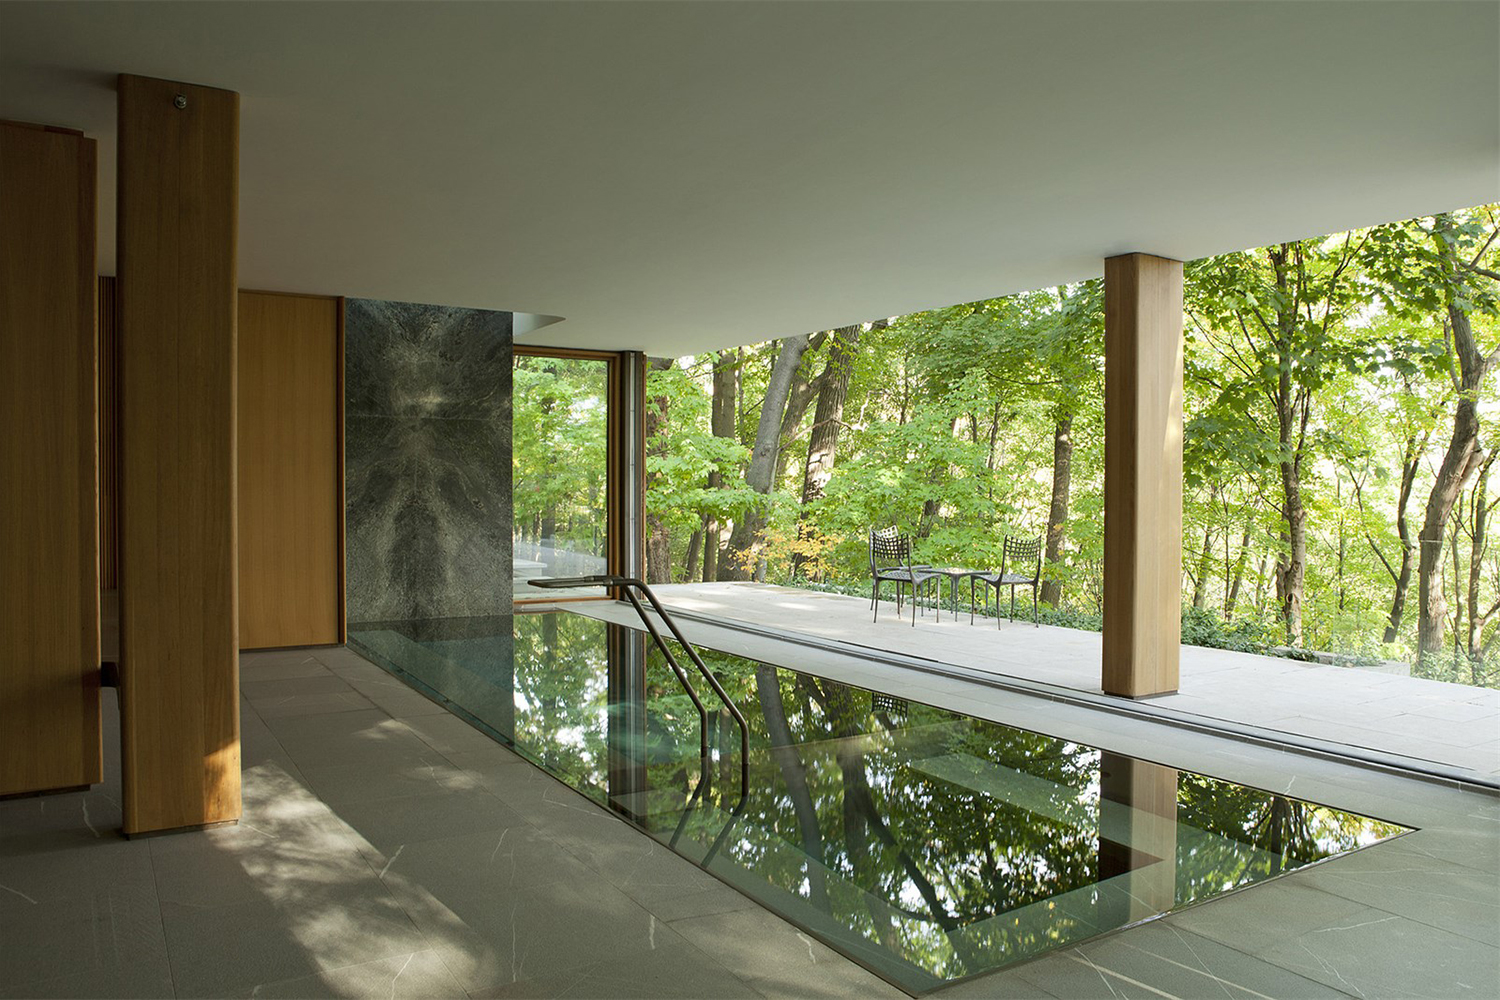 mathematician james stewarts integral house on sale for 17 million 006